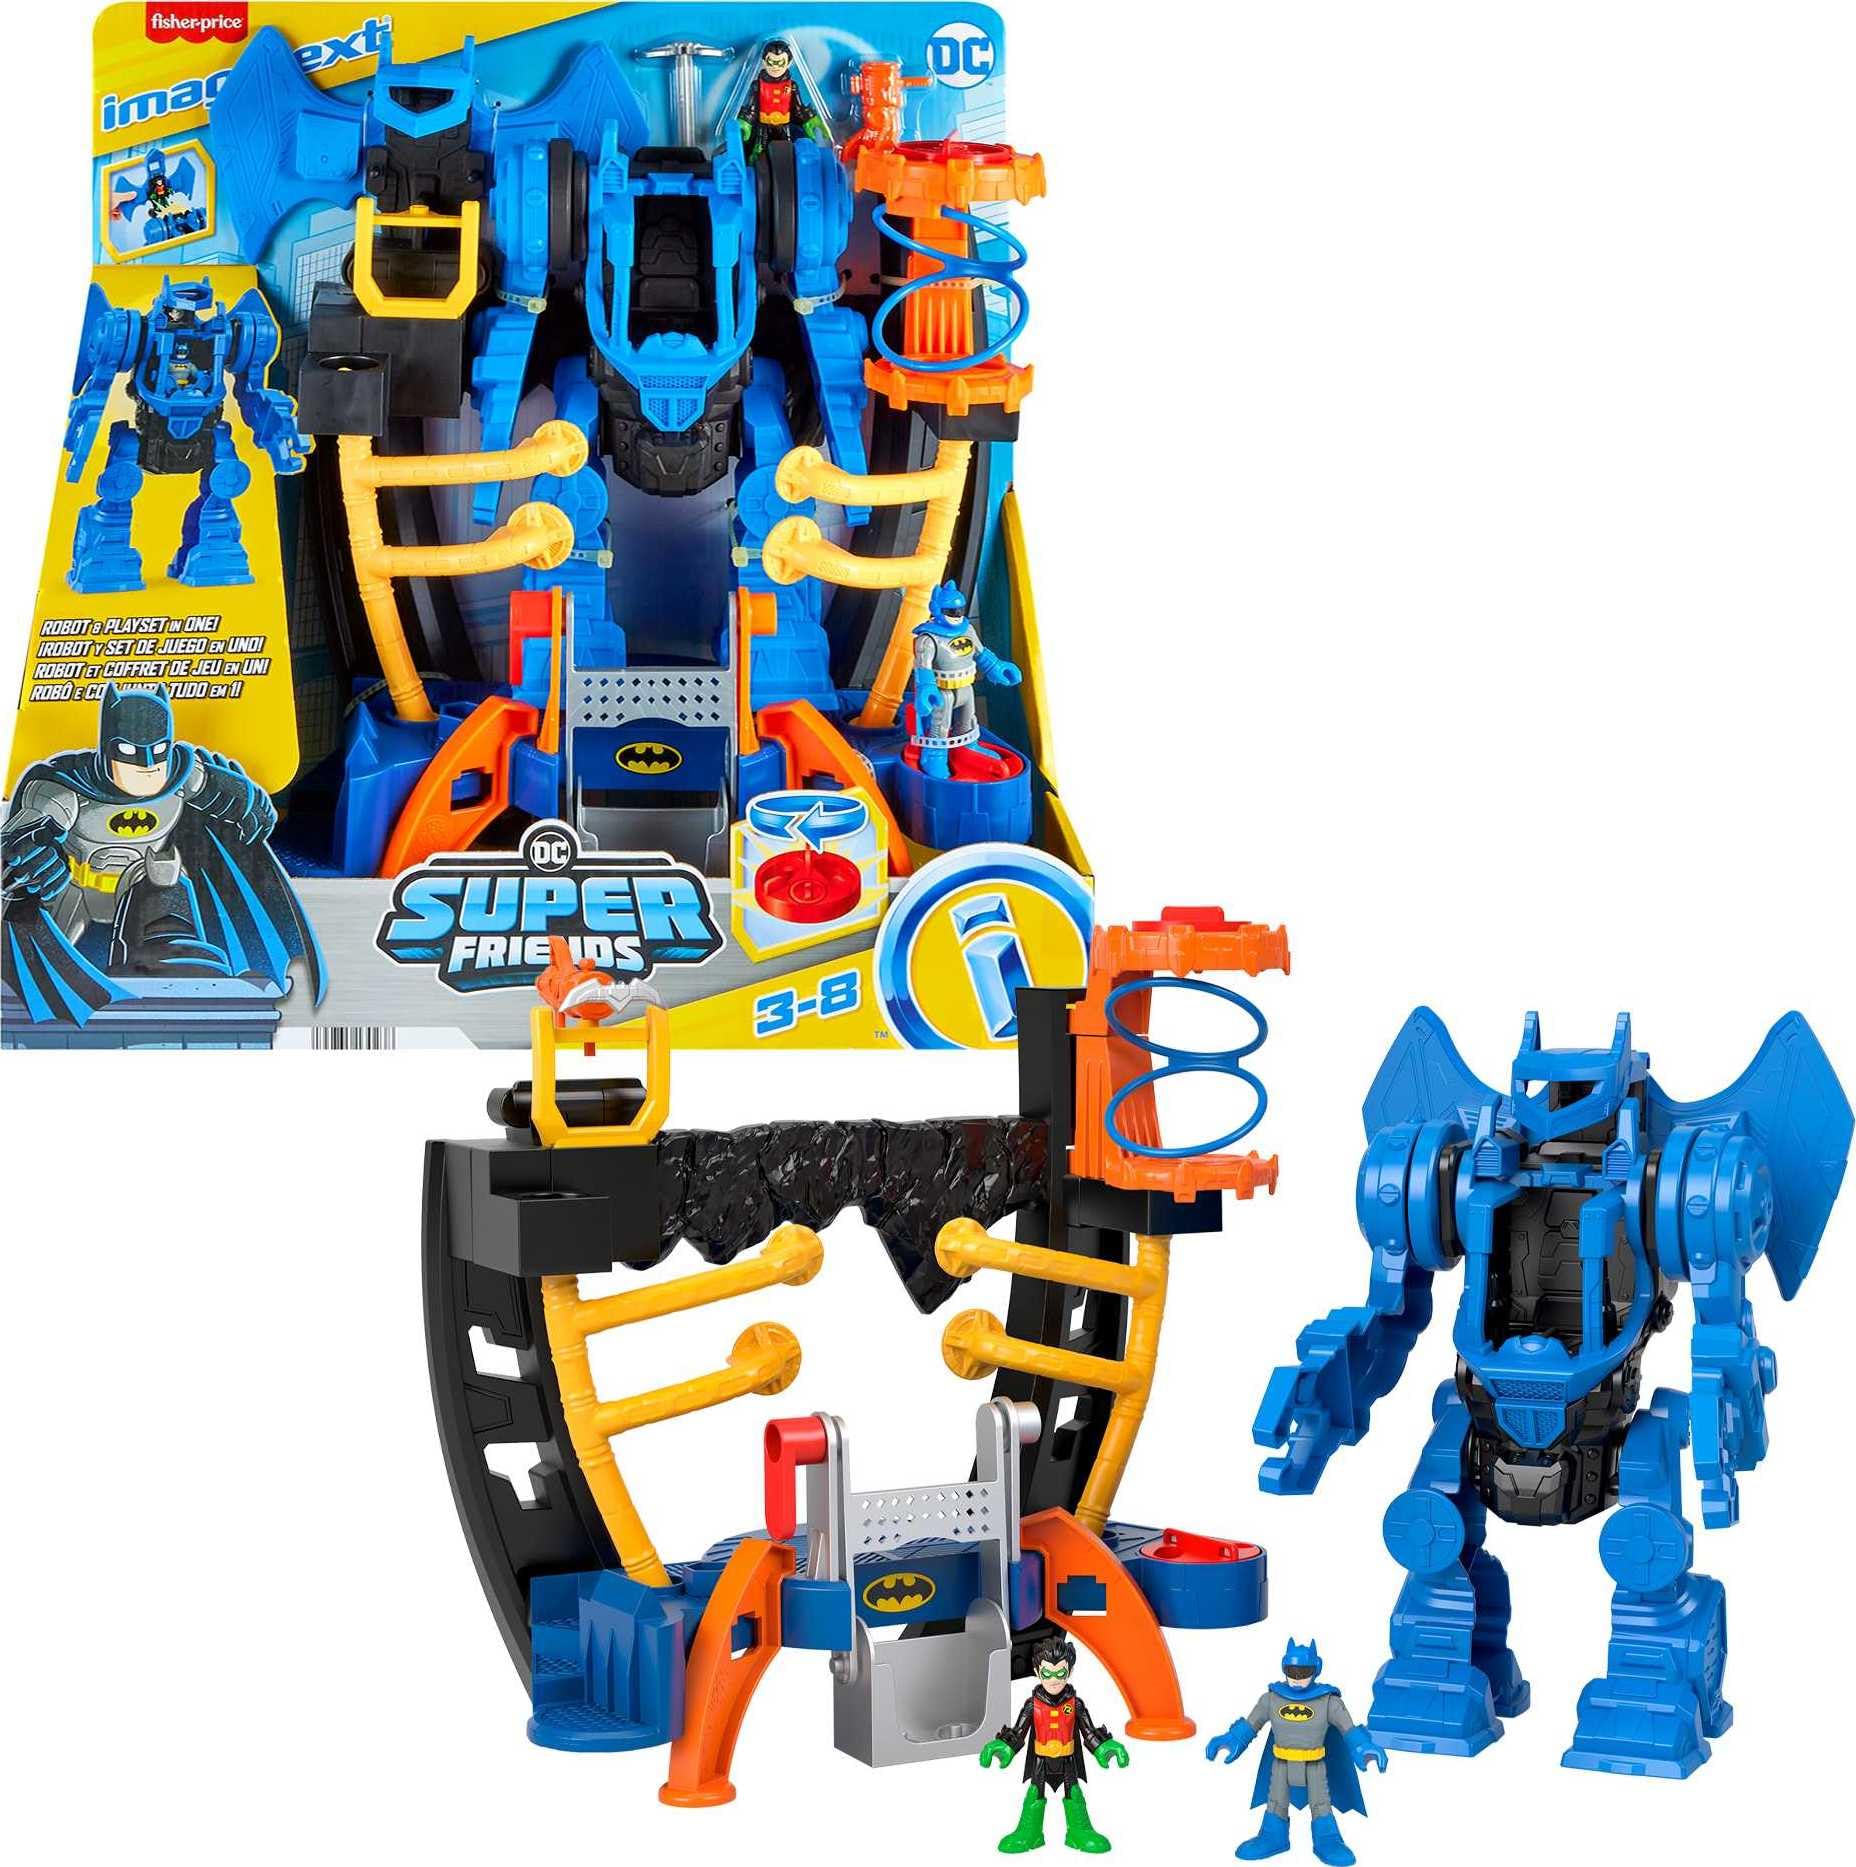 Fisher-Price Imaginext DC Super Friends Batman Playset Robo Command Center $29.97 + Free Shipping w/ Prime or on orders $35+